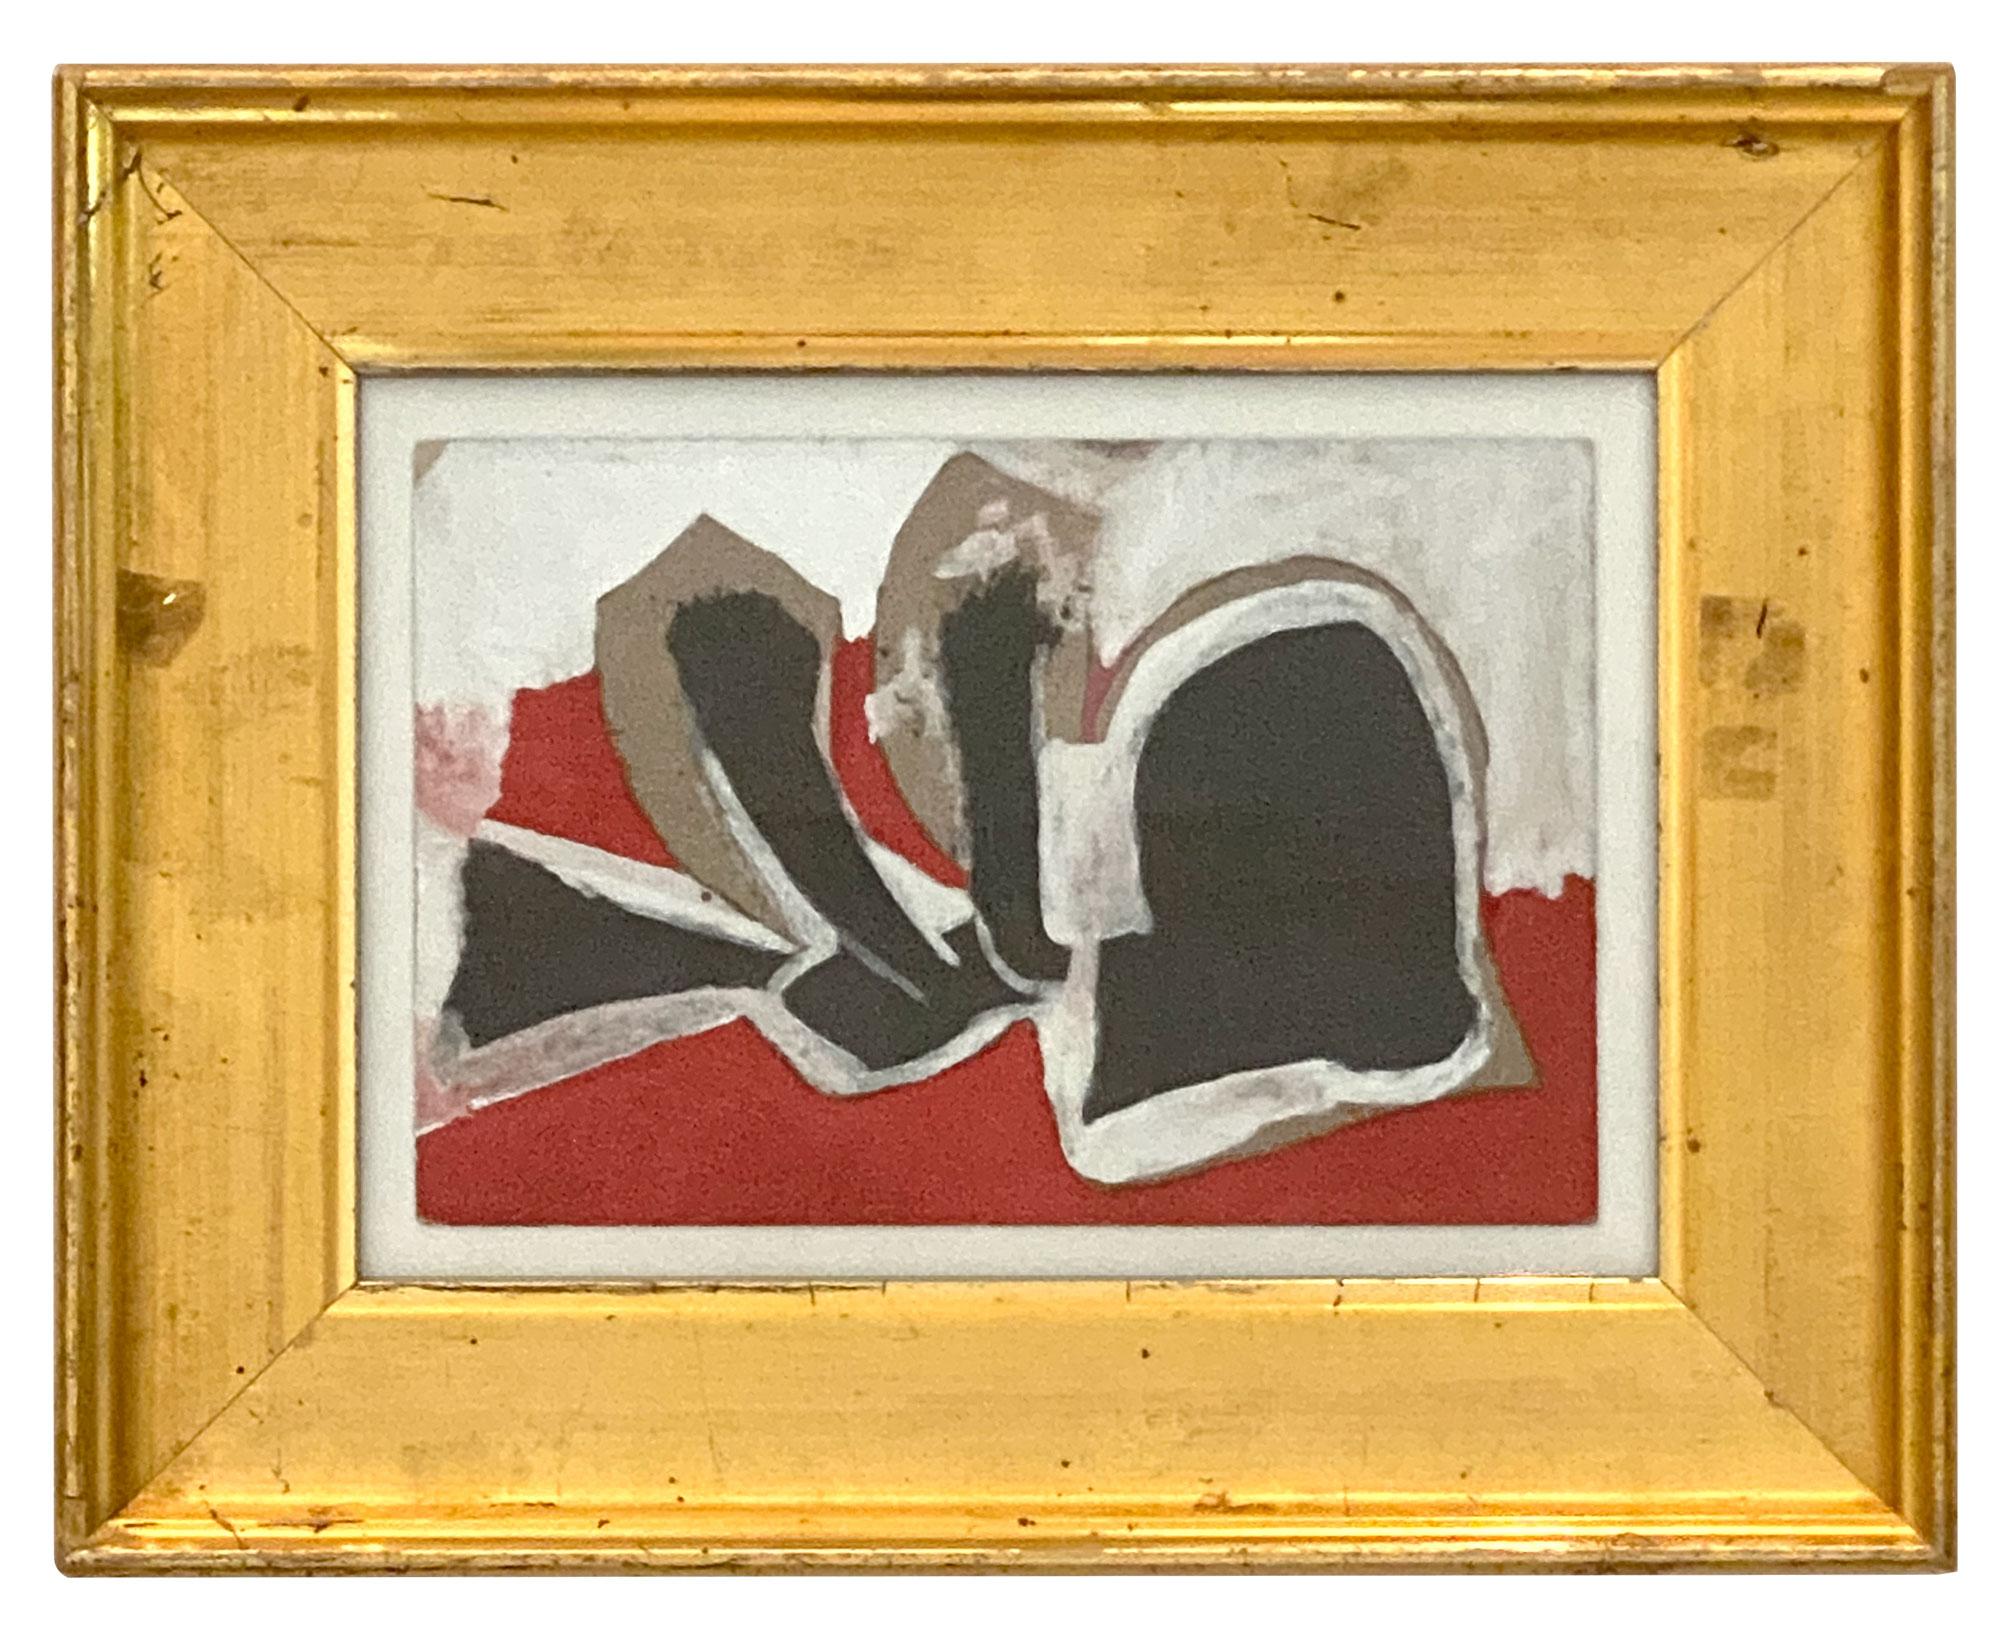 Mid-20th century painting on 8-ply rag paper in vivid color palette by artist Jack Hammack. Presented in a giltwood antique frame. 